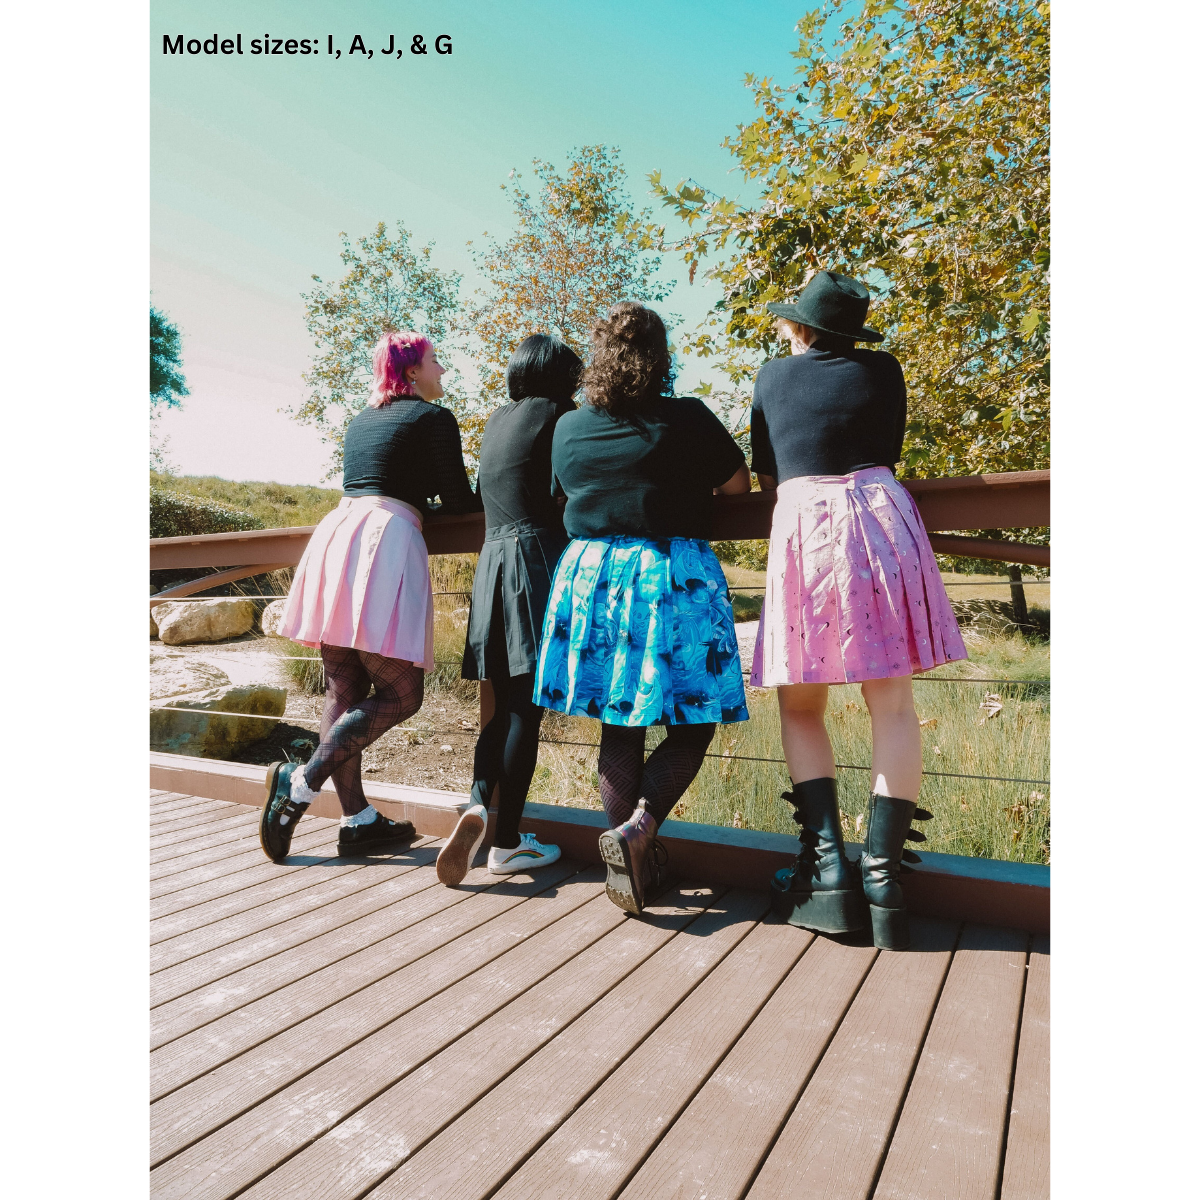 A photo of 4 people. From left to right a pink pleated skirt (size I), a black pleated skirt (size A), a blue pleated skirt with dragons (size J), and a pink starry pleated skirt (size G) all with black tops.